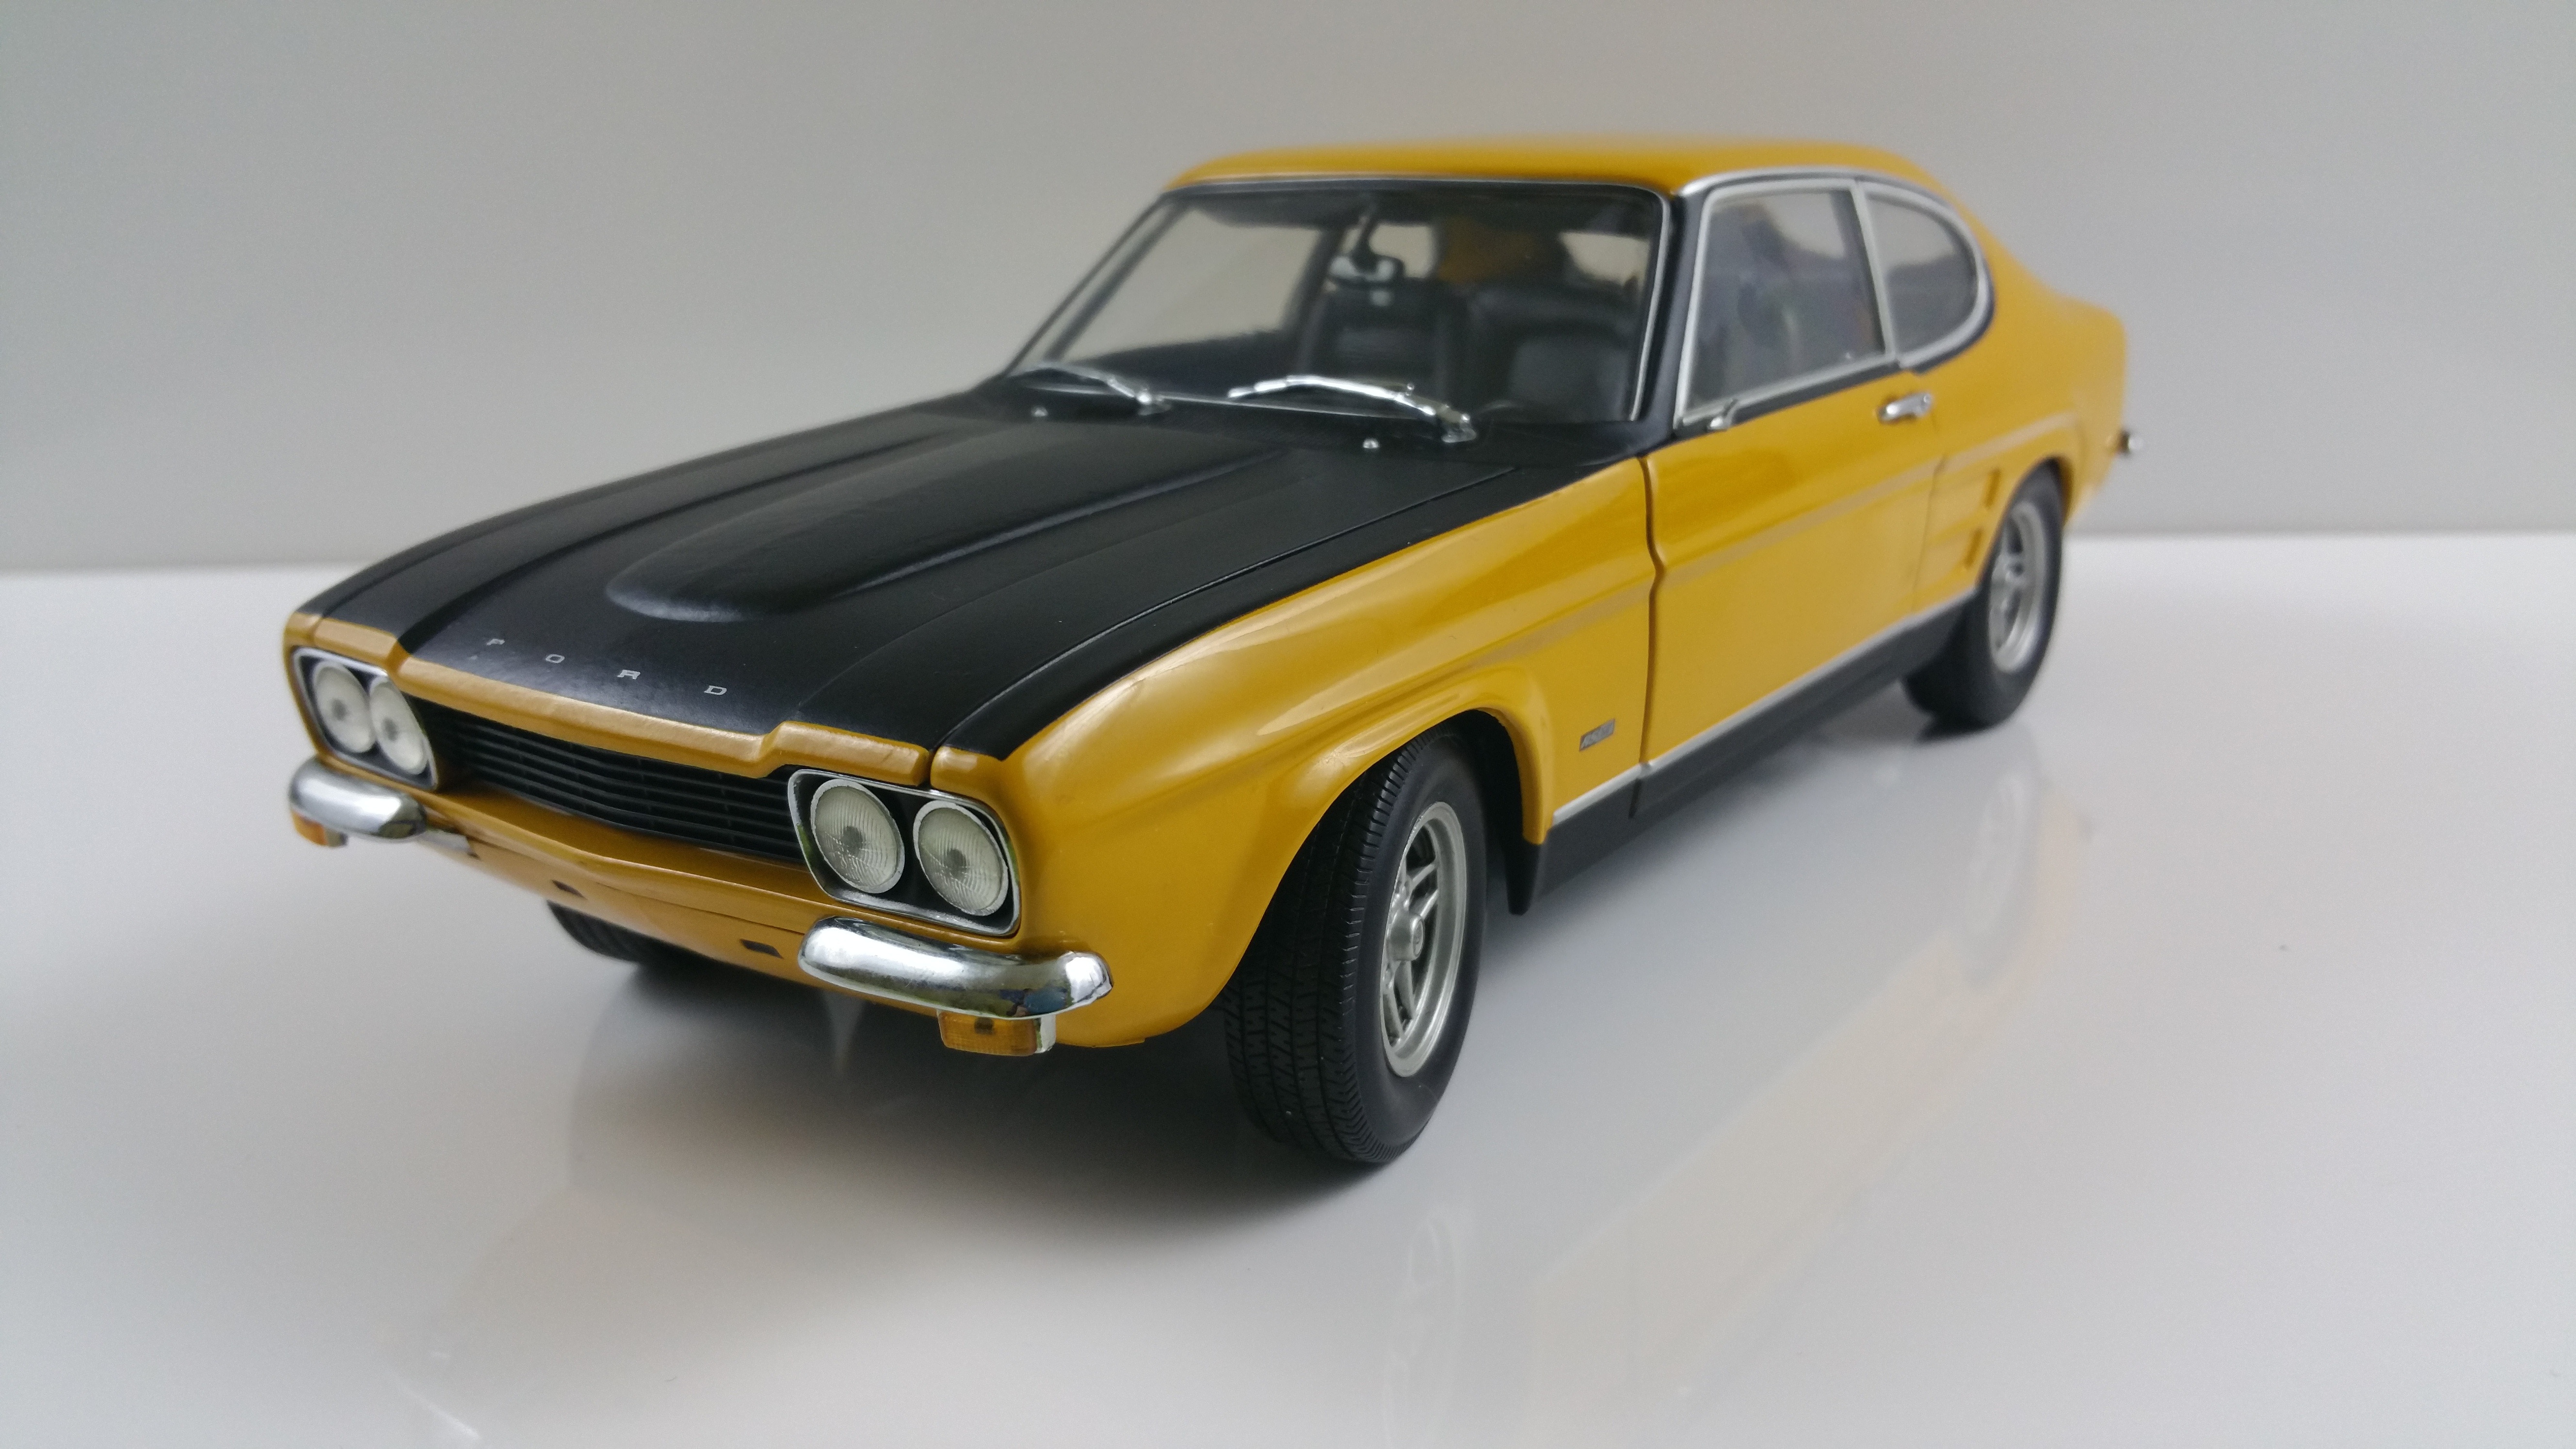 black and yellow classic car die-cast